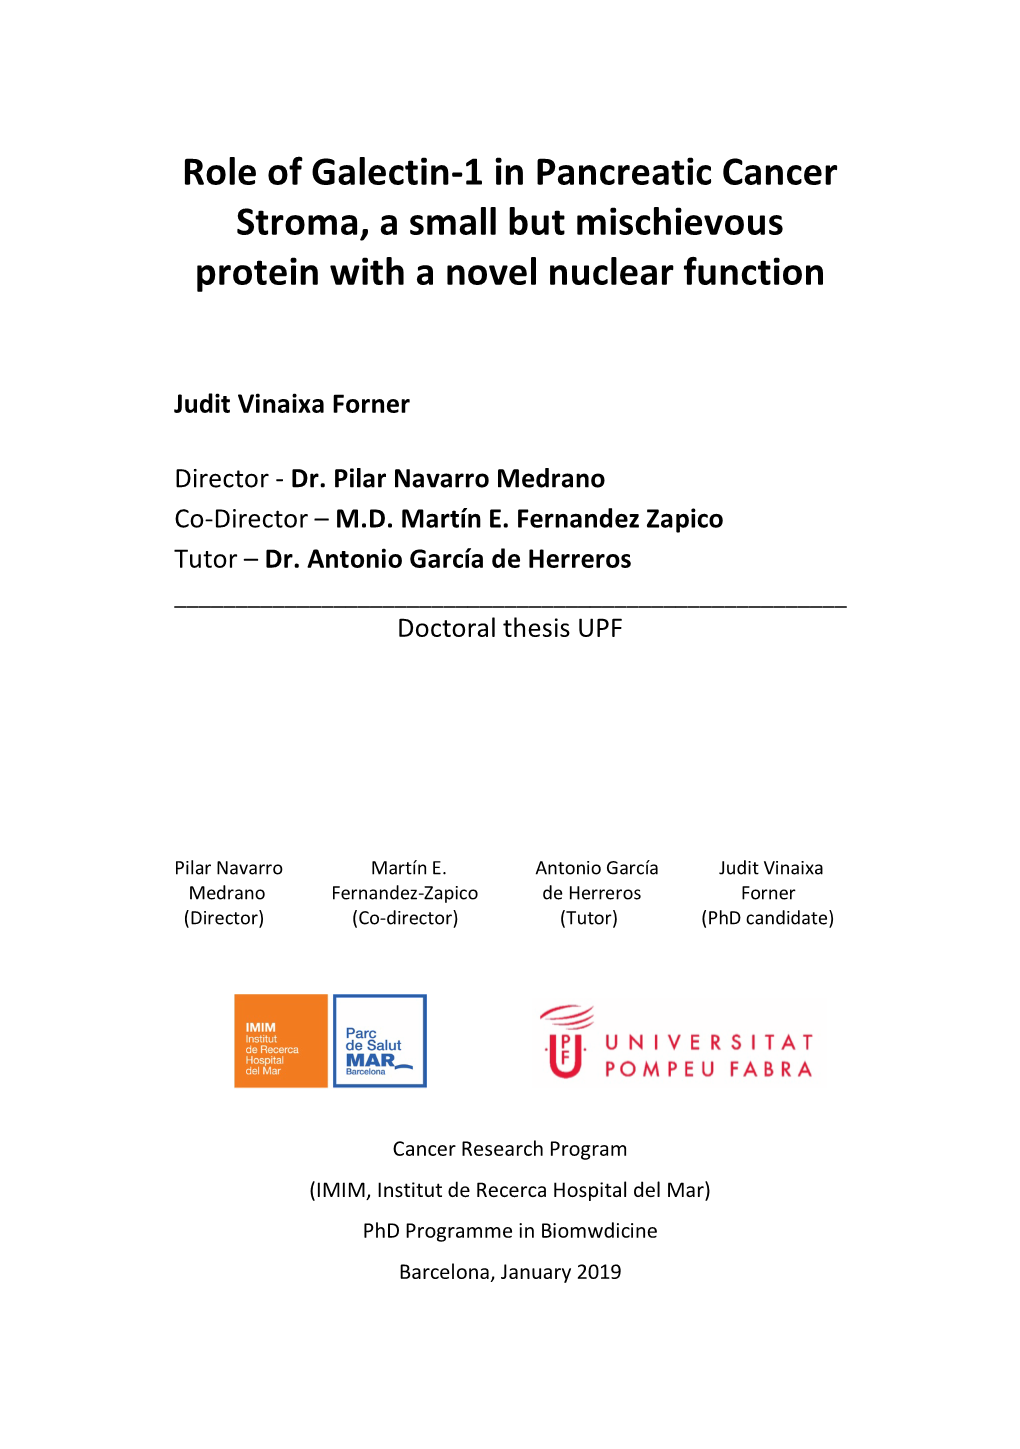 Role of Galectin-1 in Pancreatic Cancer Stroma, a Small but Mischievous Protein with a Novel Nuclear Function